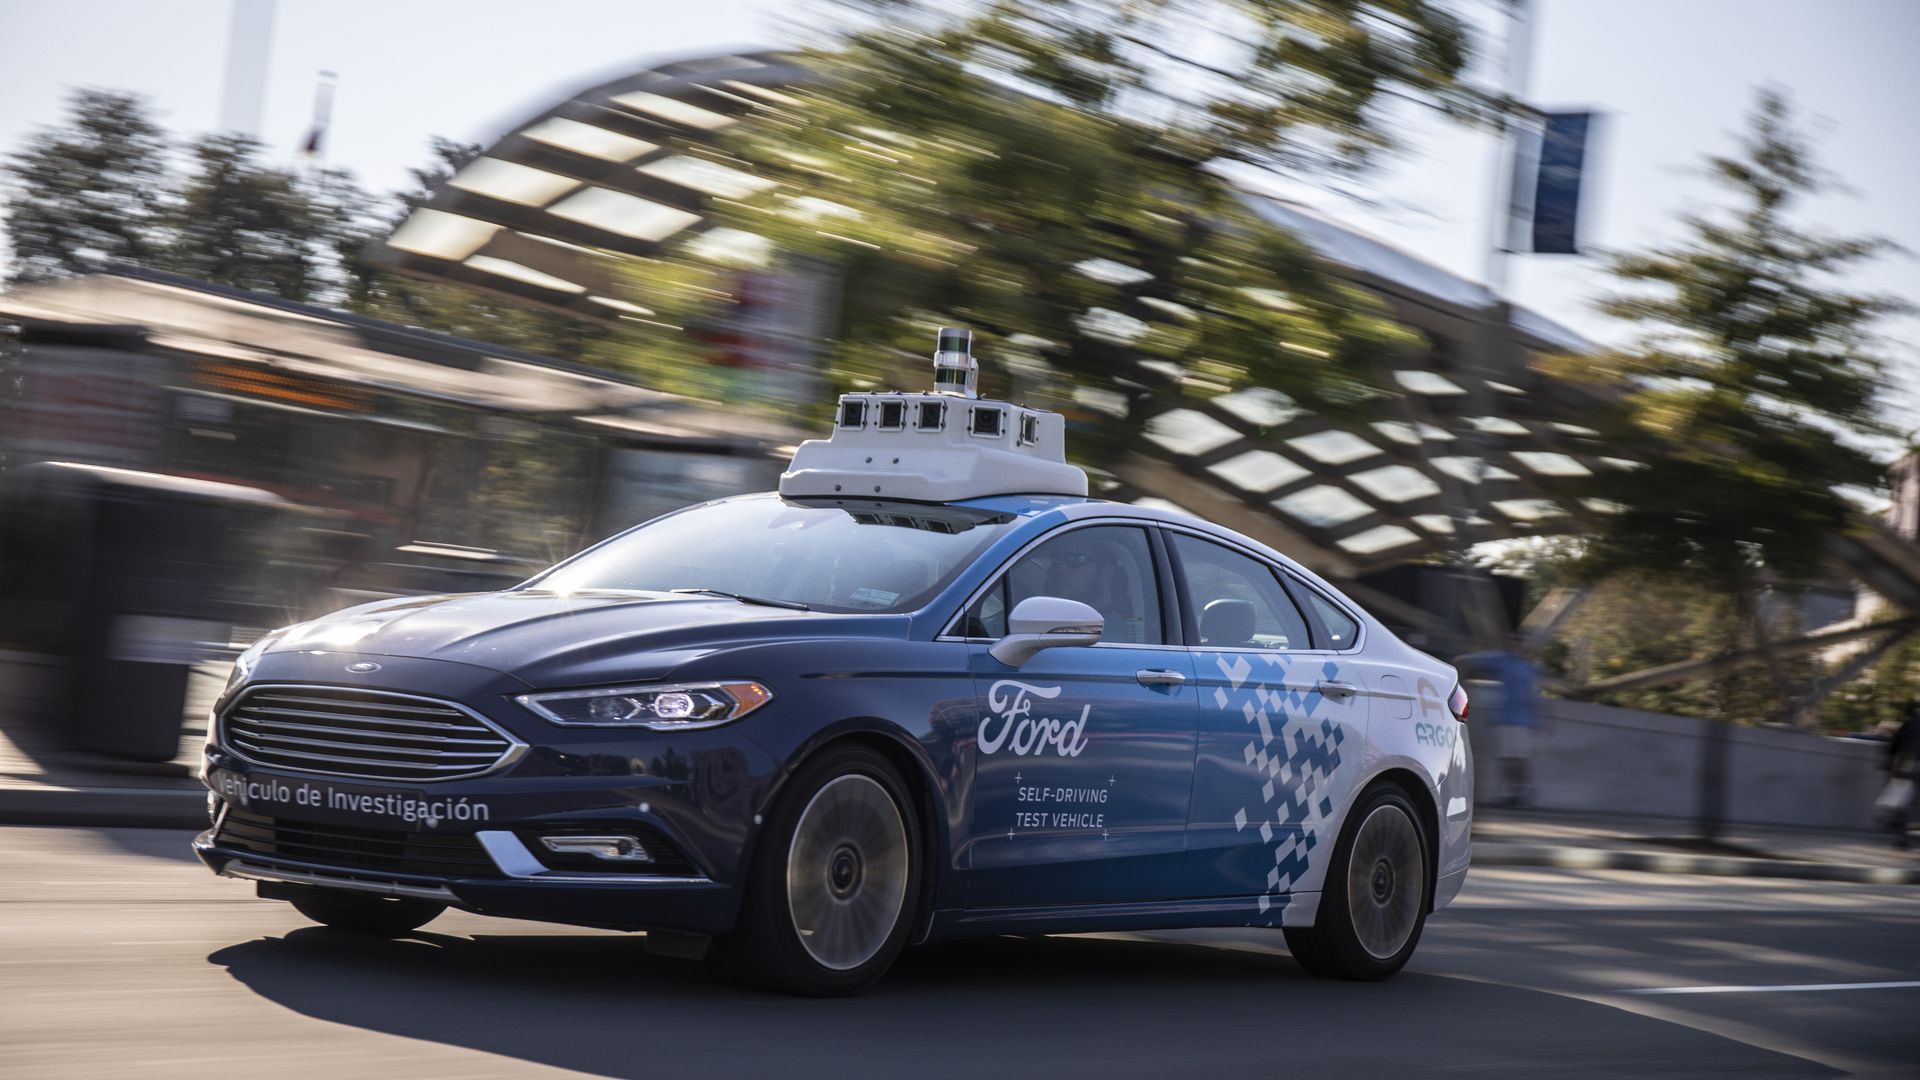 One of Ford's self-driving test vehicles on the streets of Washington, D.C. 